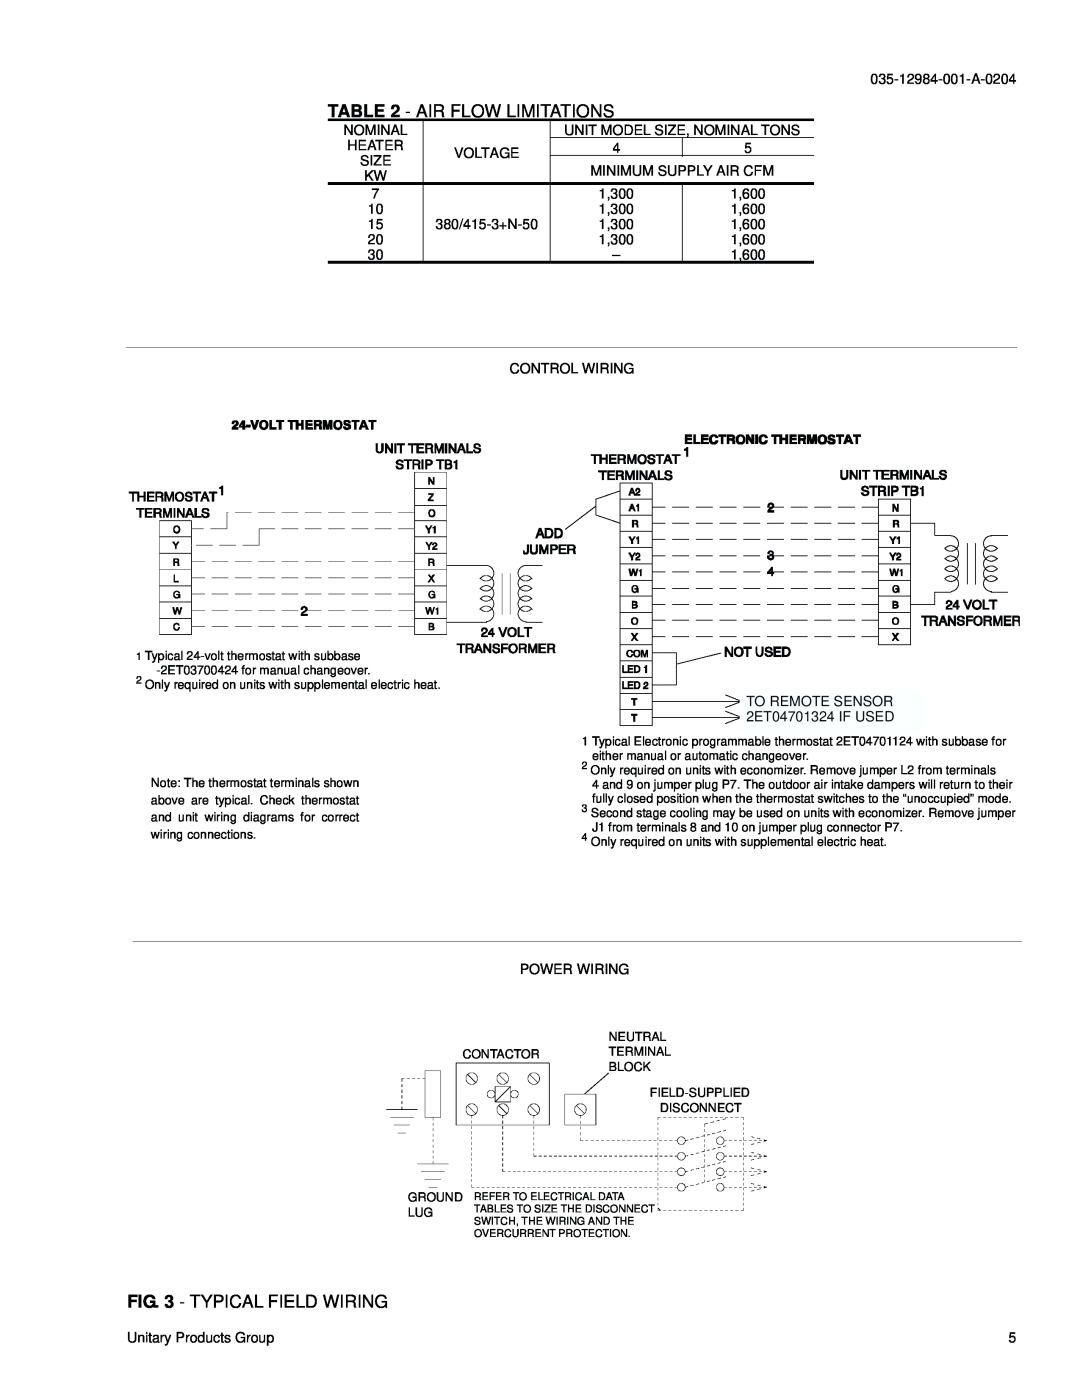 York B3CH 048 and 060 installation instructions Air Flow Limitations, Typical Field Wiring 